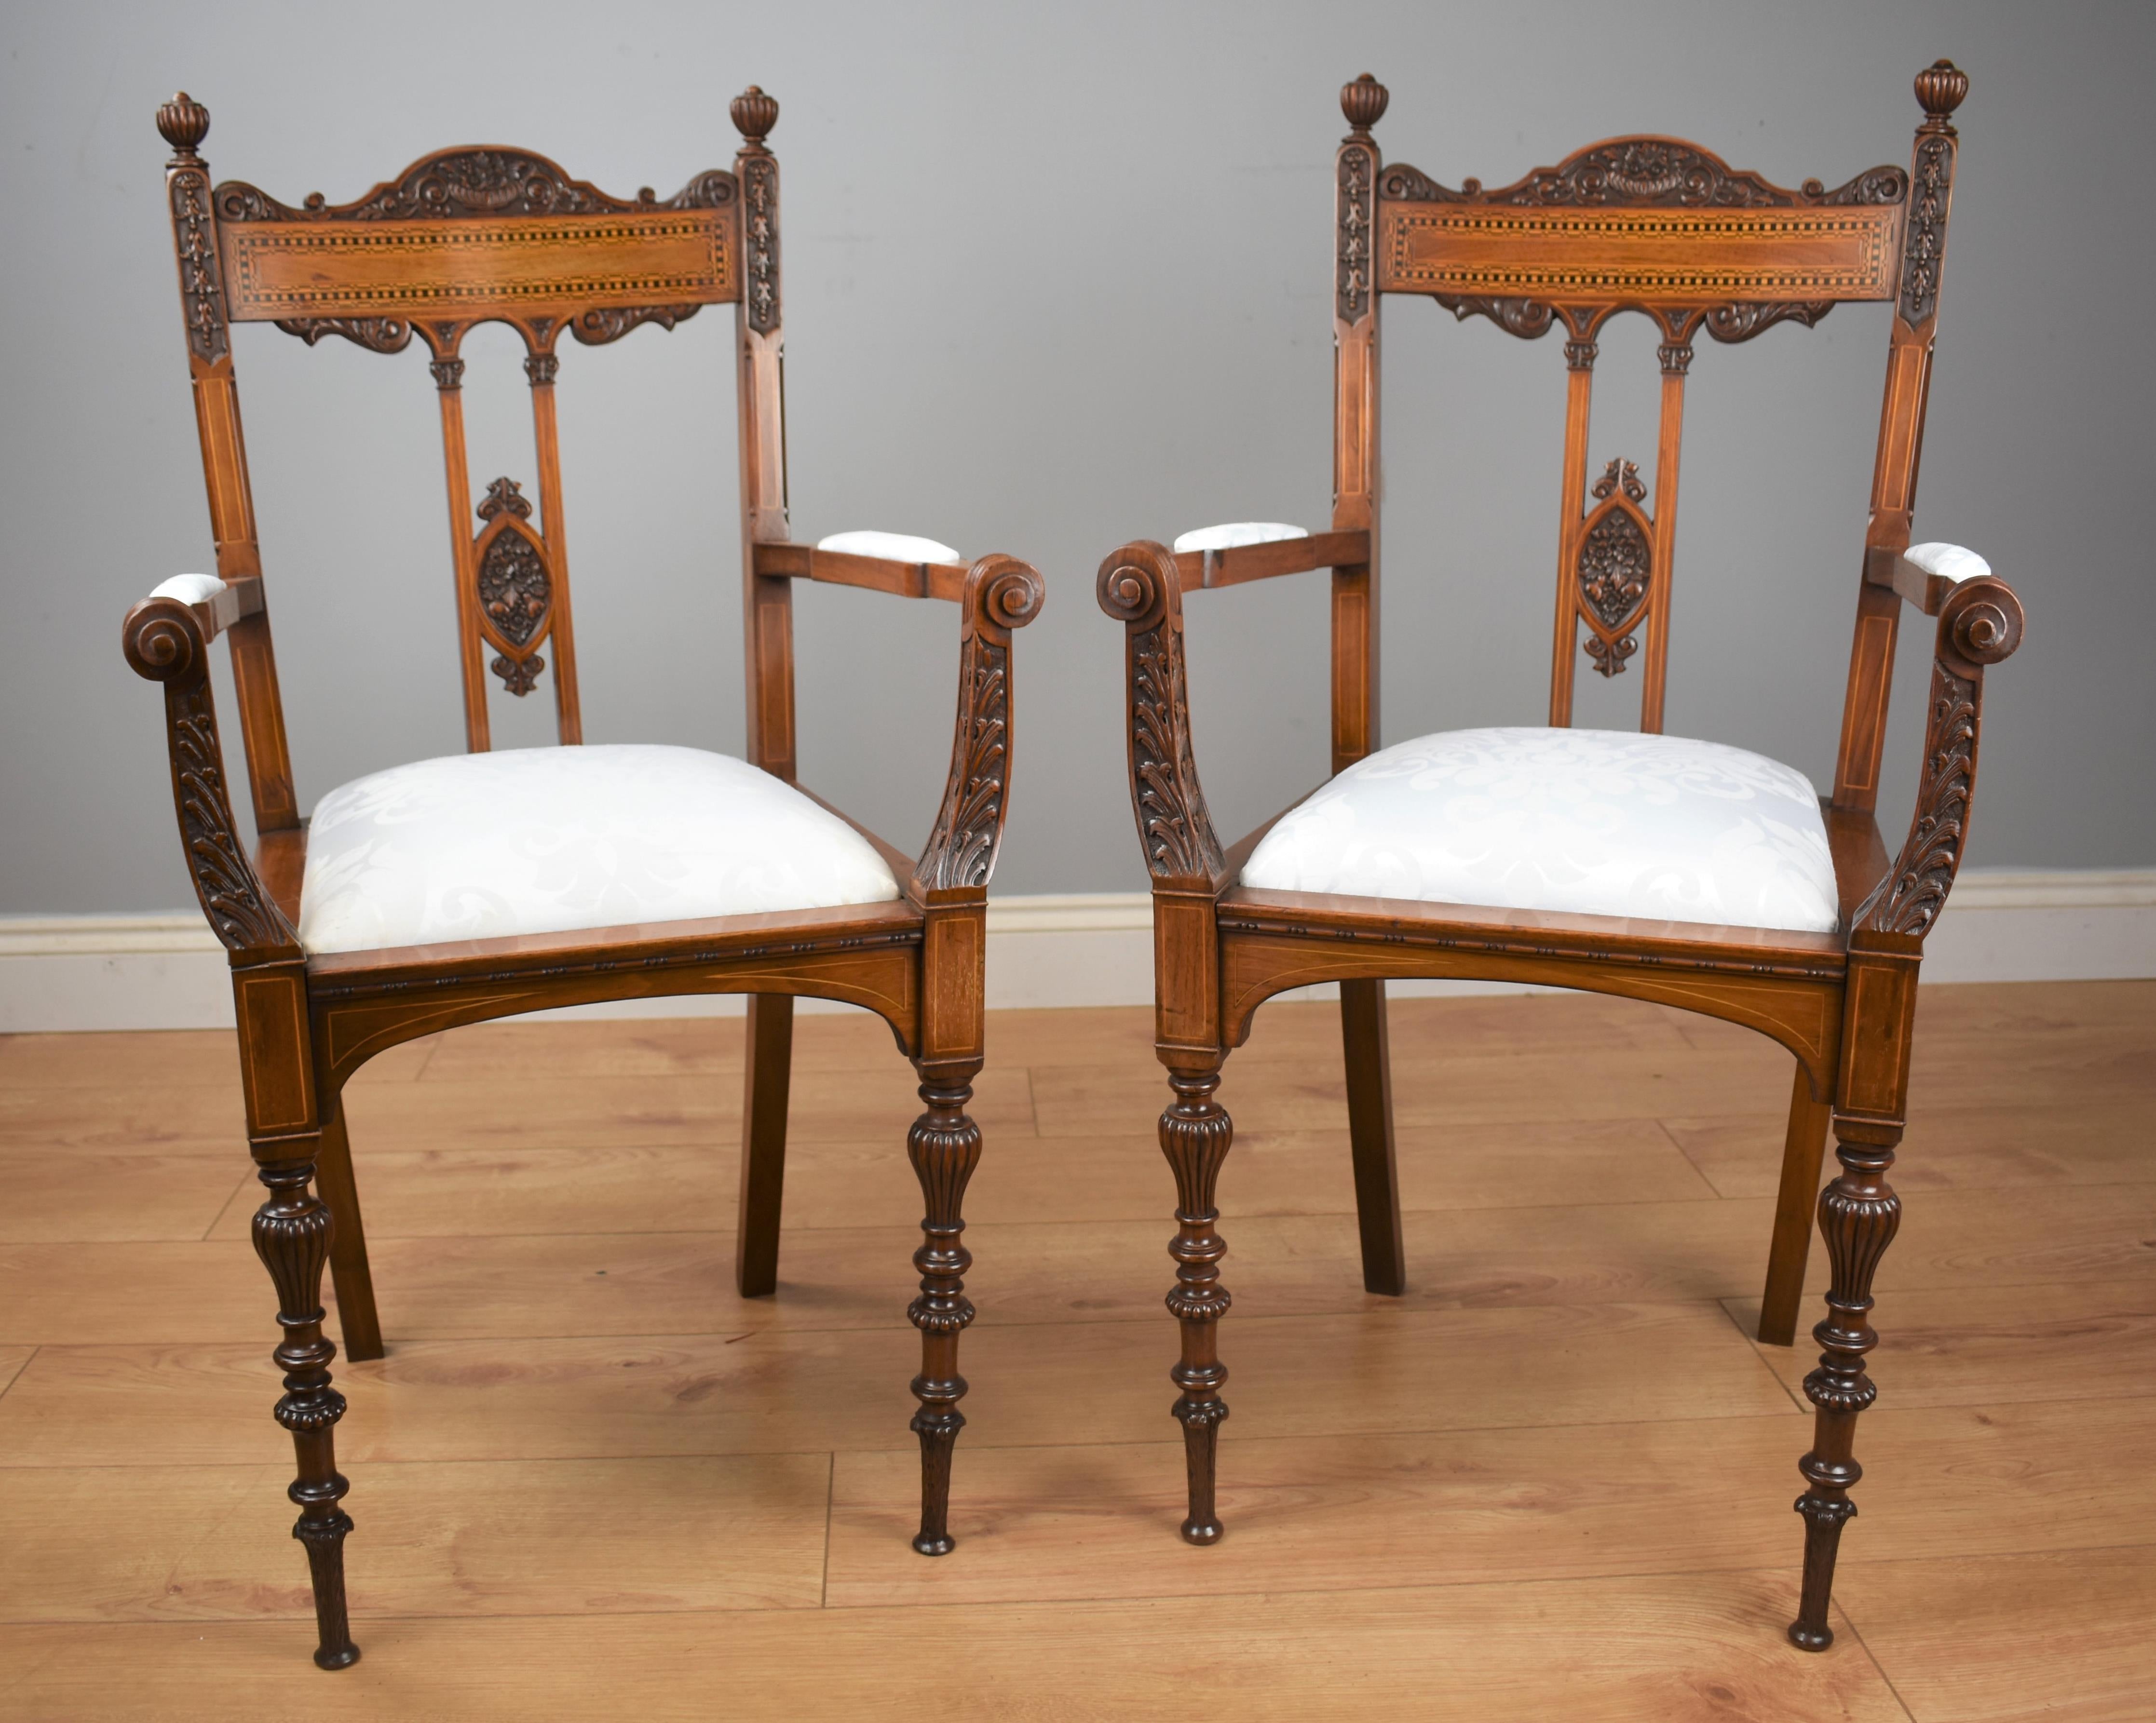 Late 19th Century Superb Quality Victorian Mahogany Chairs